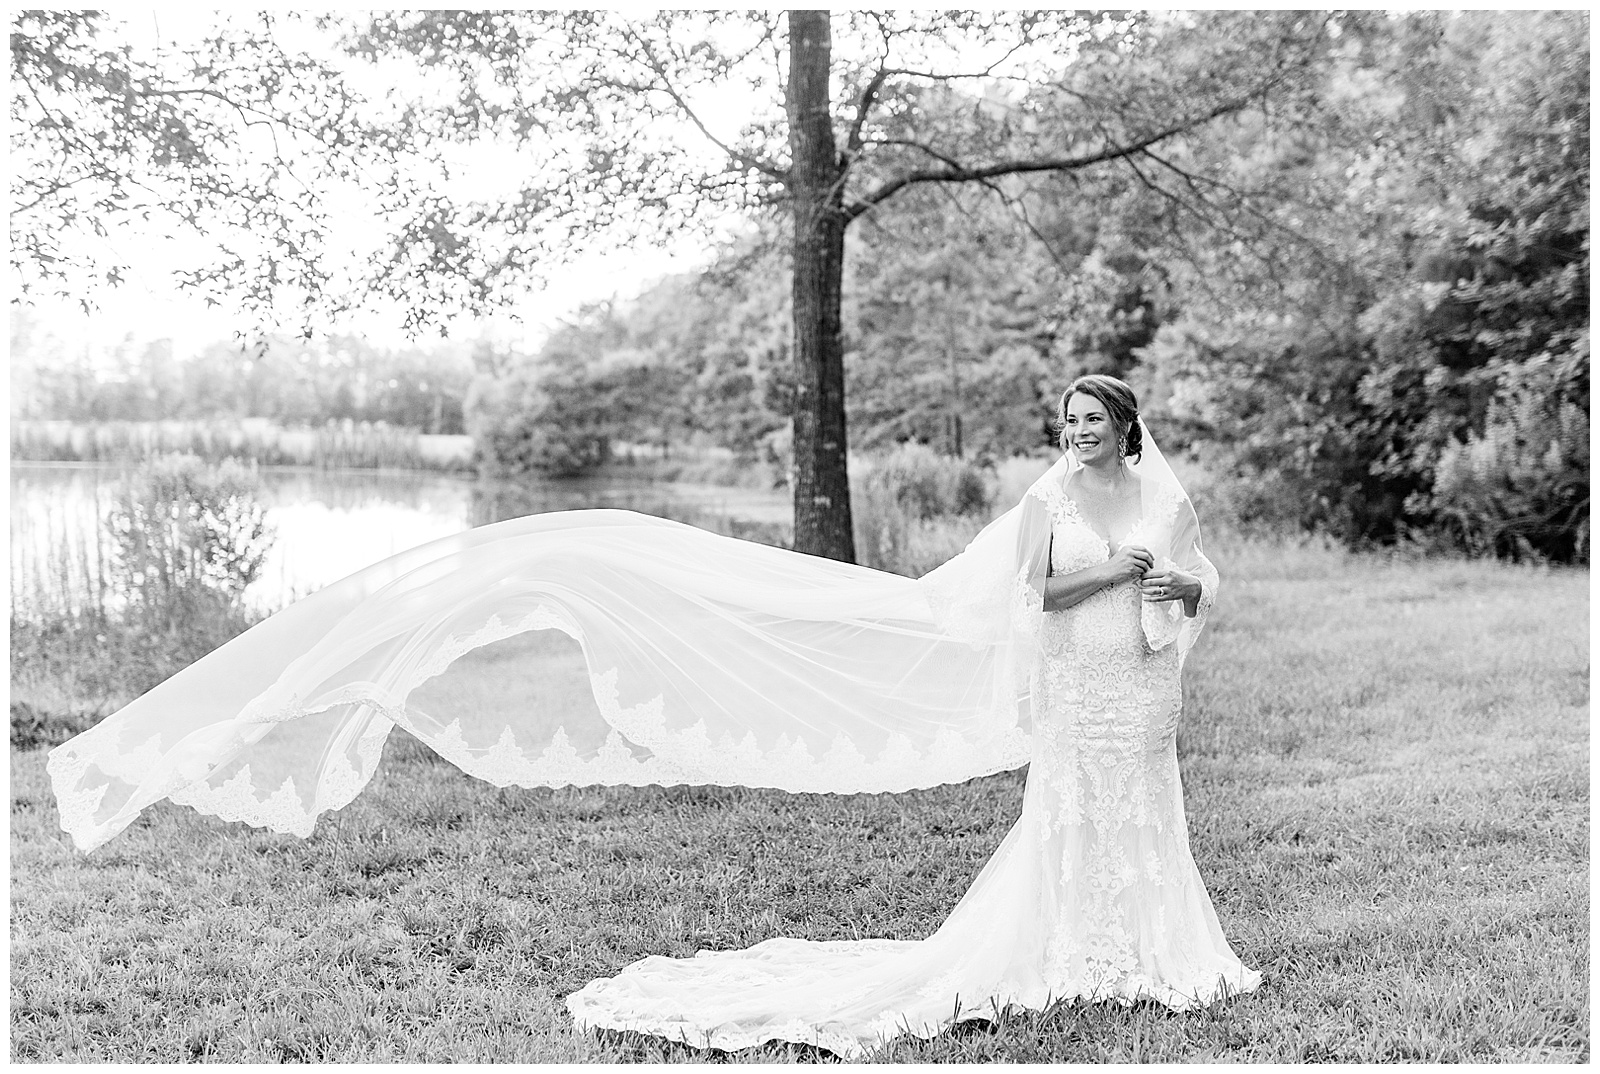 cathedral length veil from amazon and lace wedding dress from sunset bridal portraits in woods and field